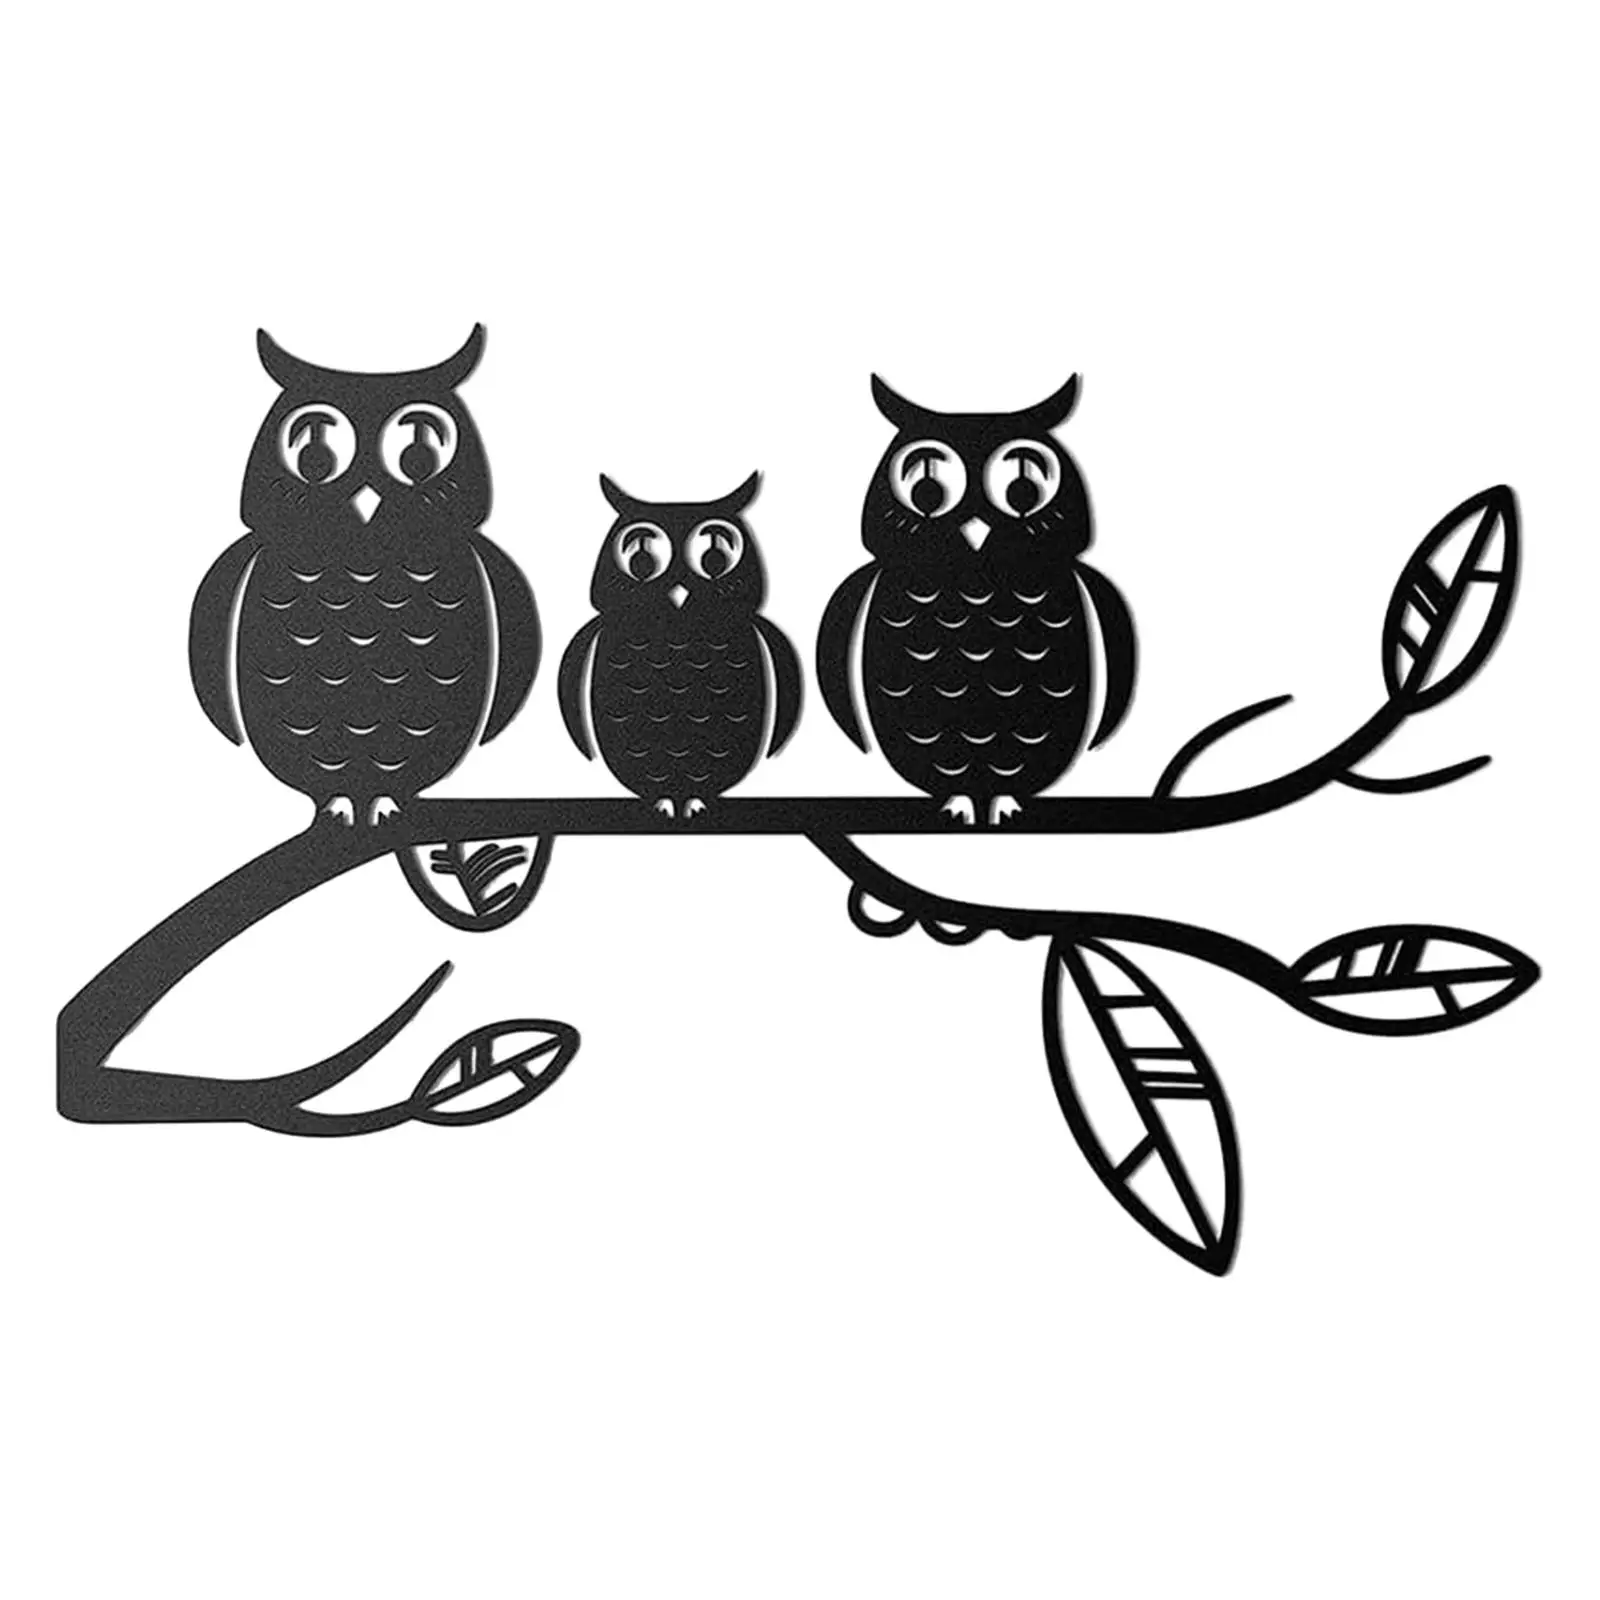 Owls Metal Wall Art Decor Rustic Iron Wall Decoration Home Decor Ornament for Front Door Farmhouse Garden Fence Living Room